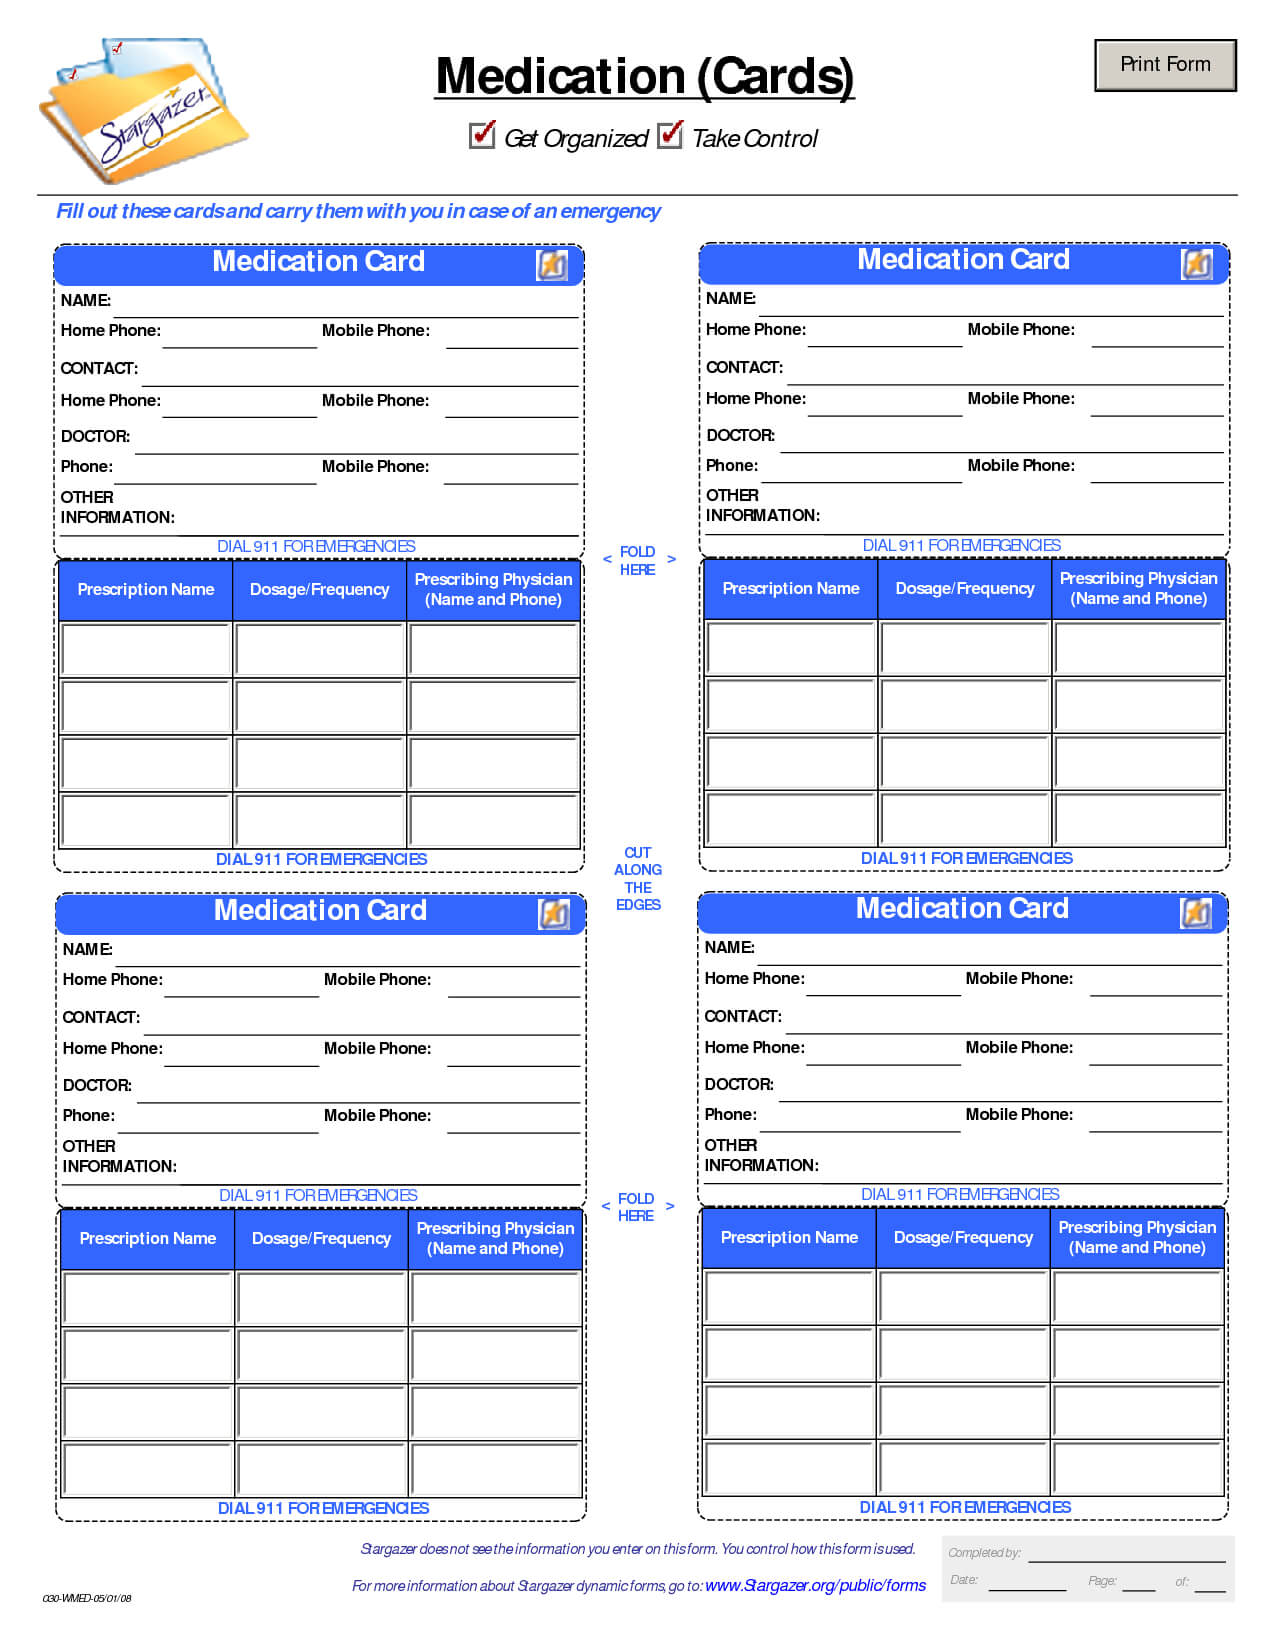 Patient Medication Card Template | Medication List, Medical Regarding Medical Appointment Card Template Free